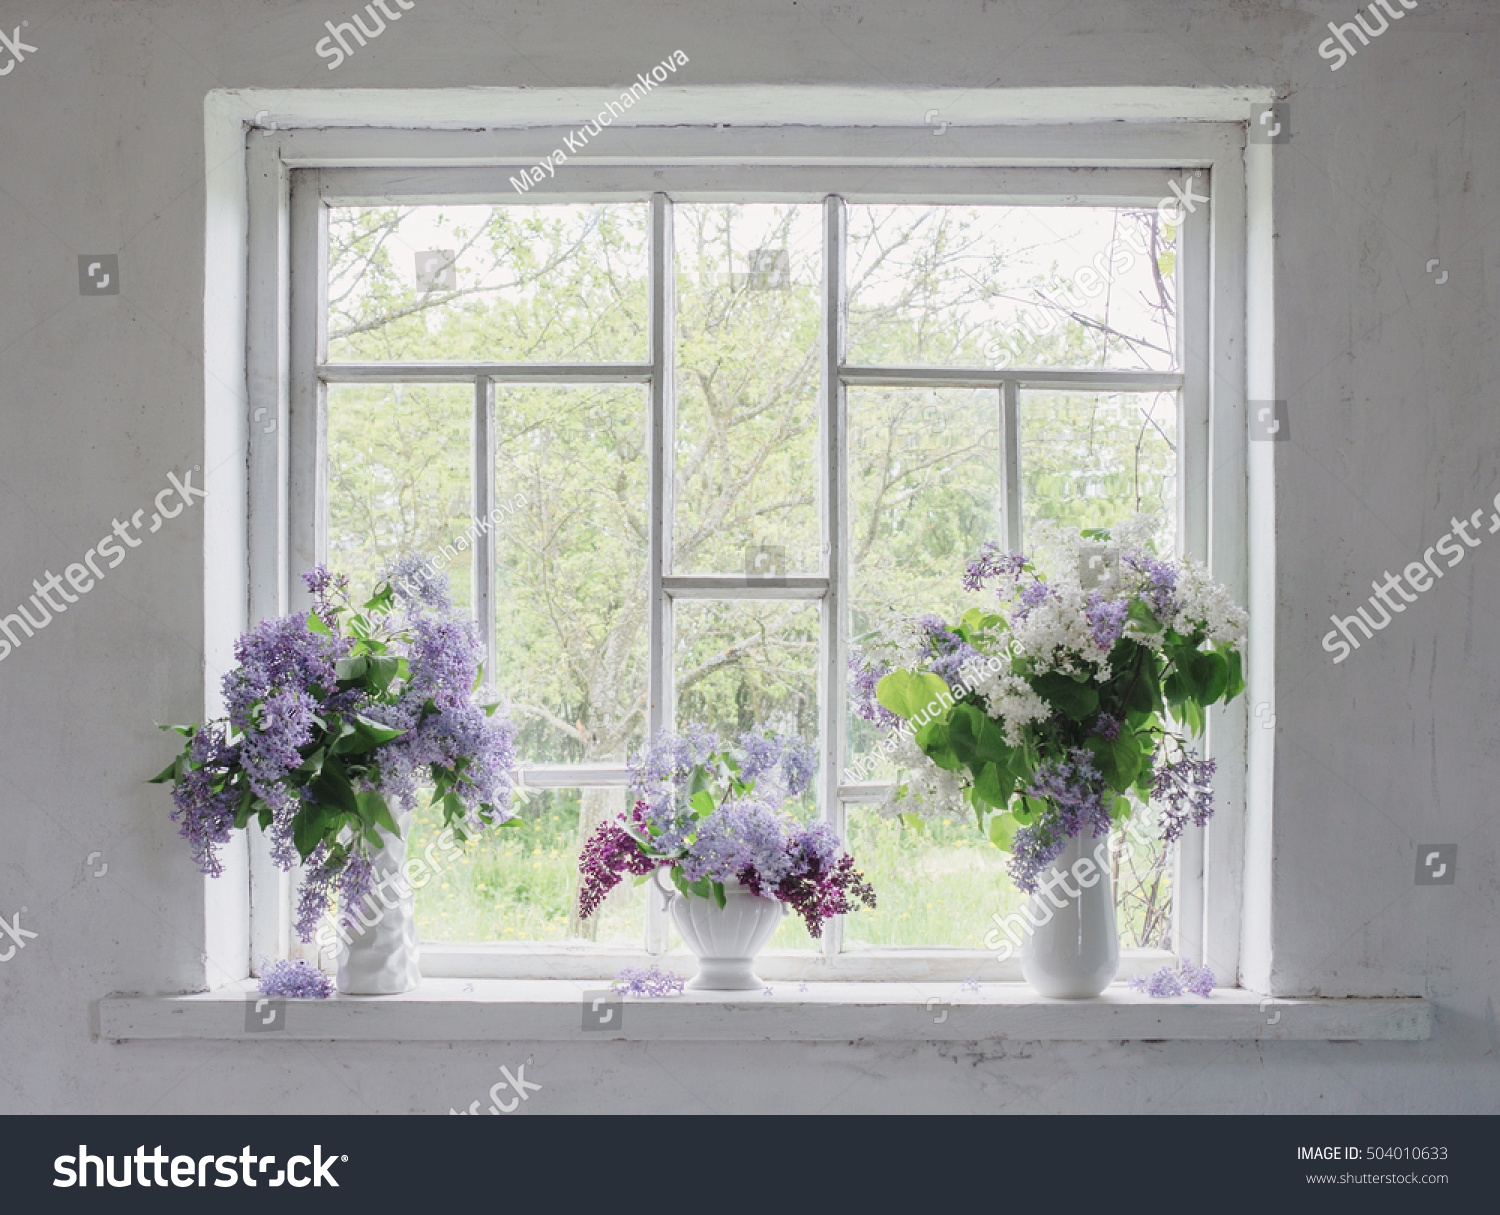 Blooming Branch Of Lilac At The Window Stock Photo 504010633 : Shutterstock